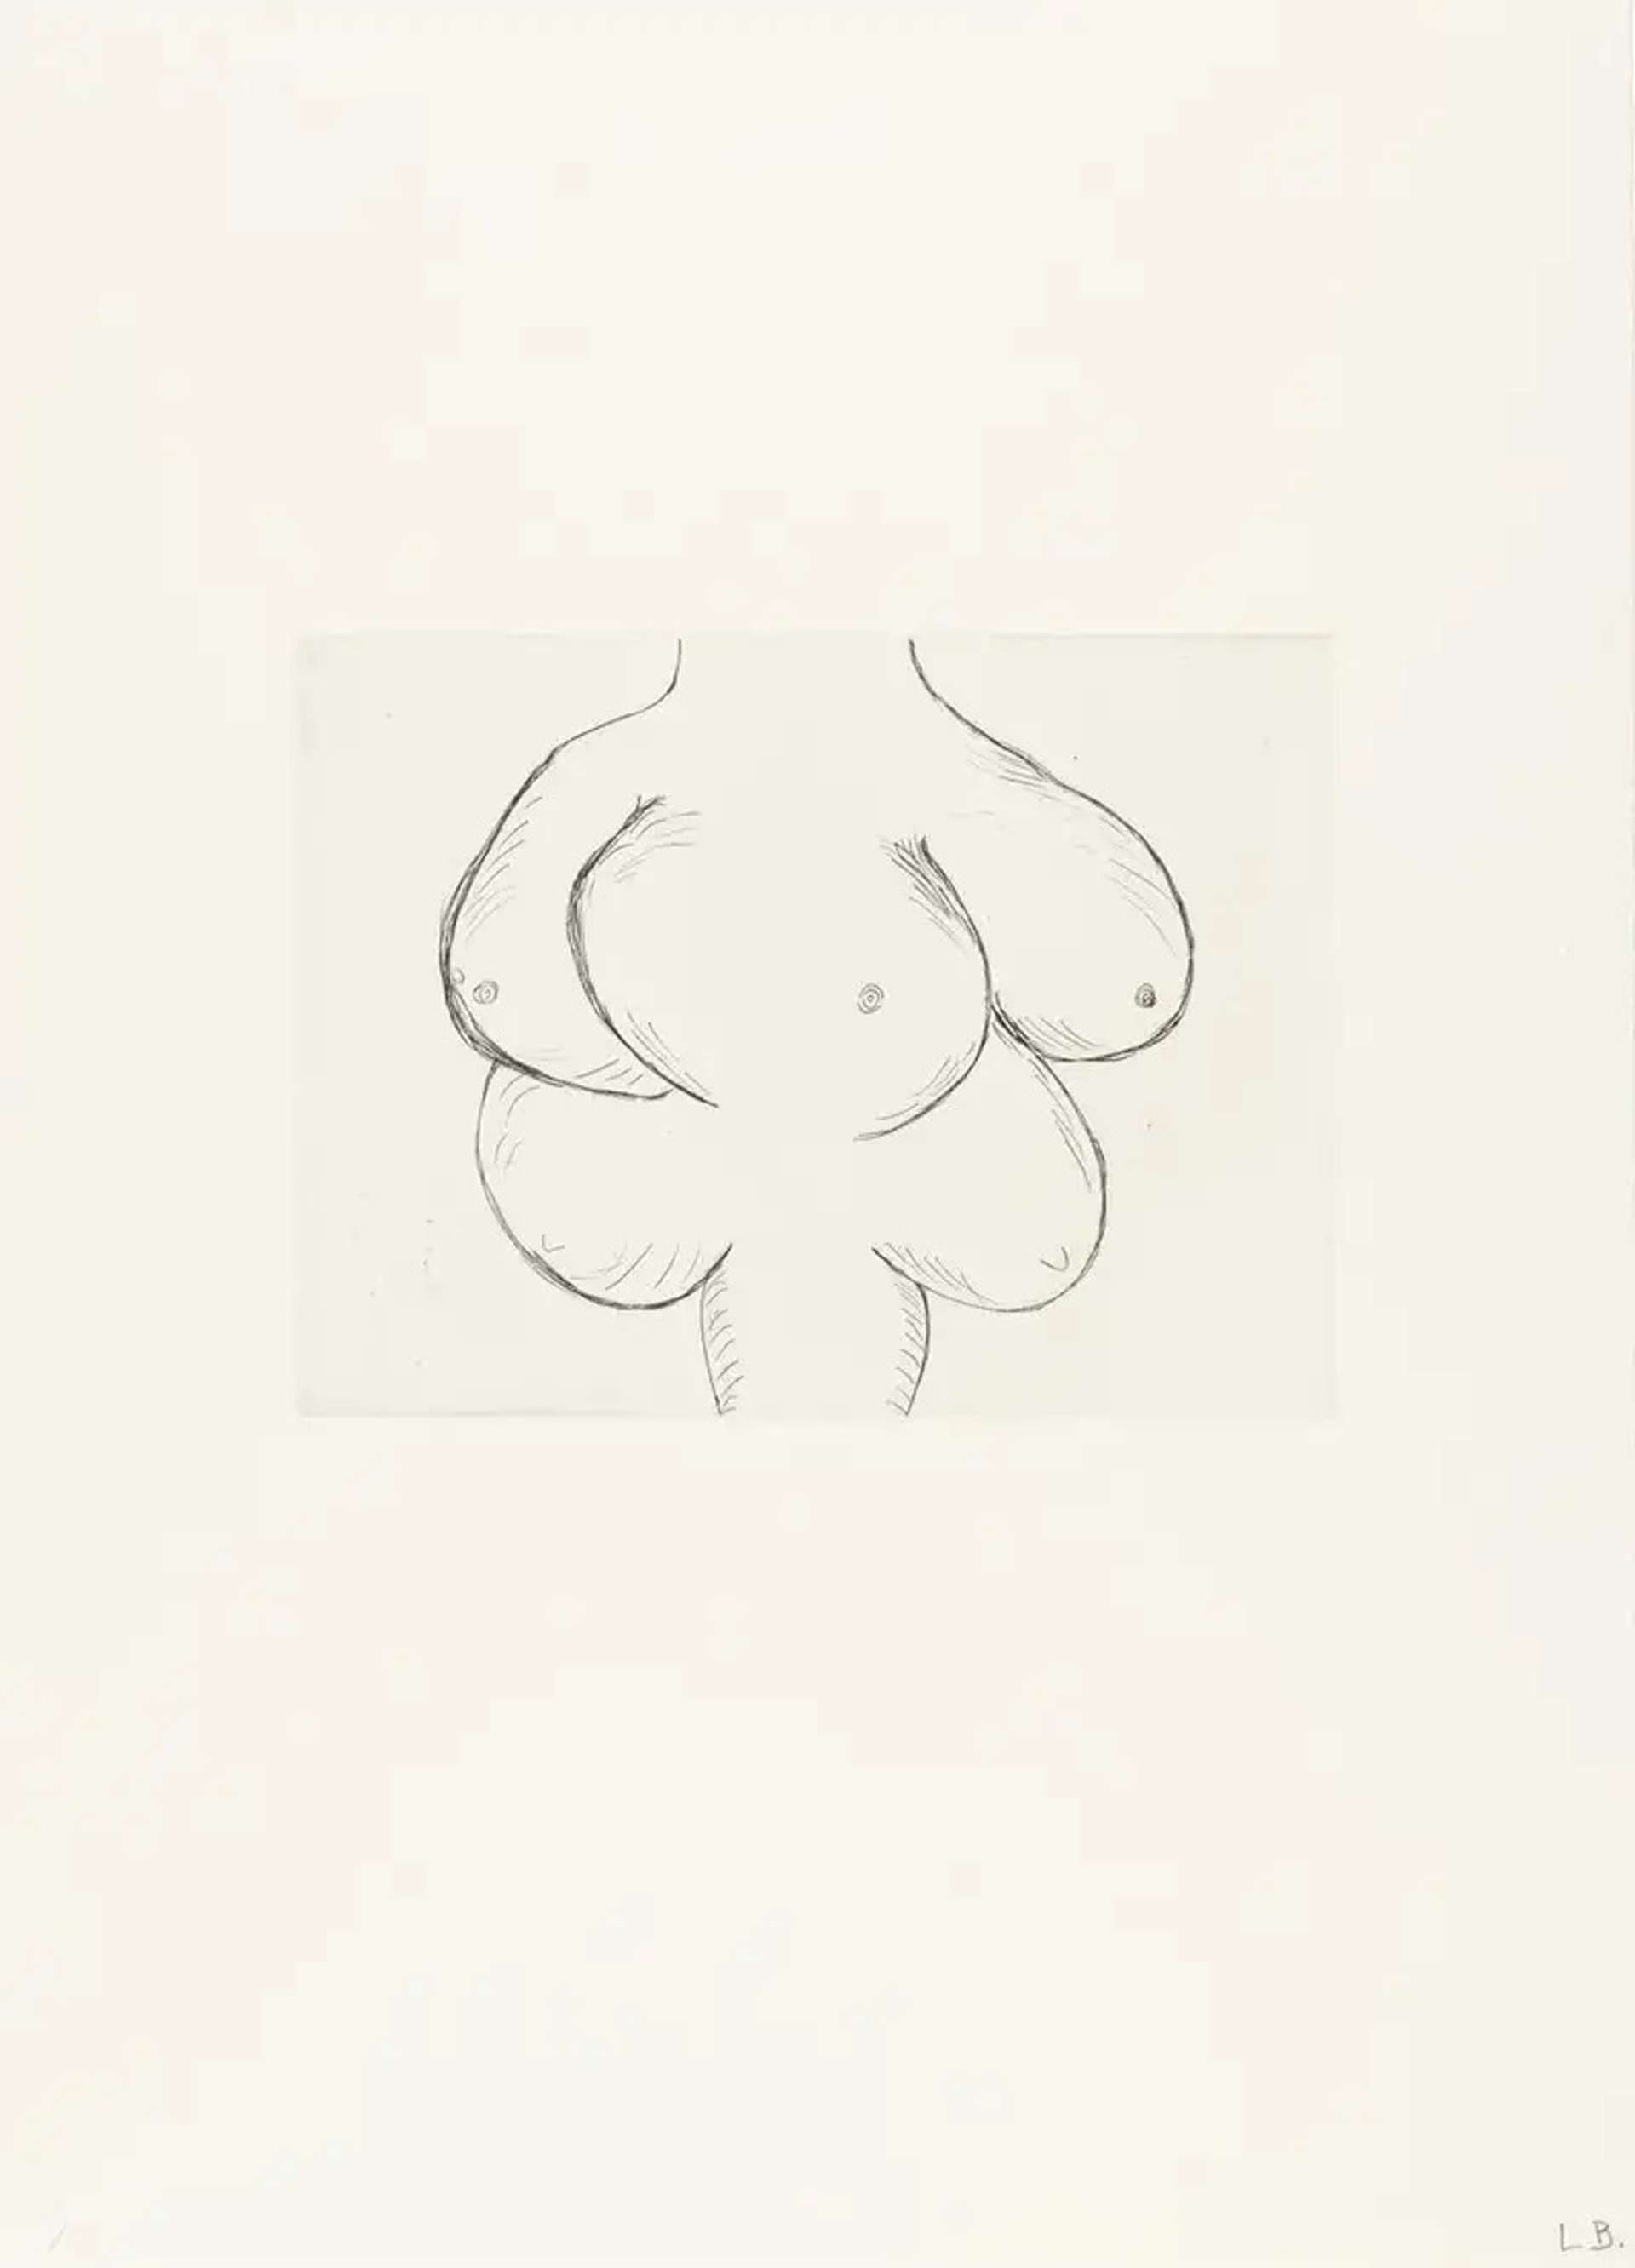 Louise Bourgeois Untitled No. 4. A monochromatic etching of an anatomical depiction of multiple breasts. 